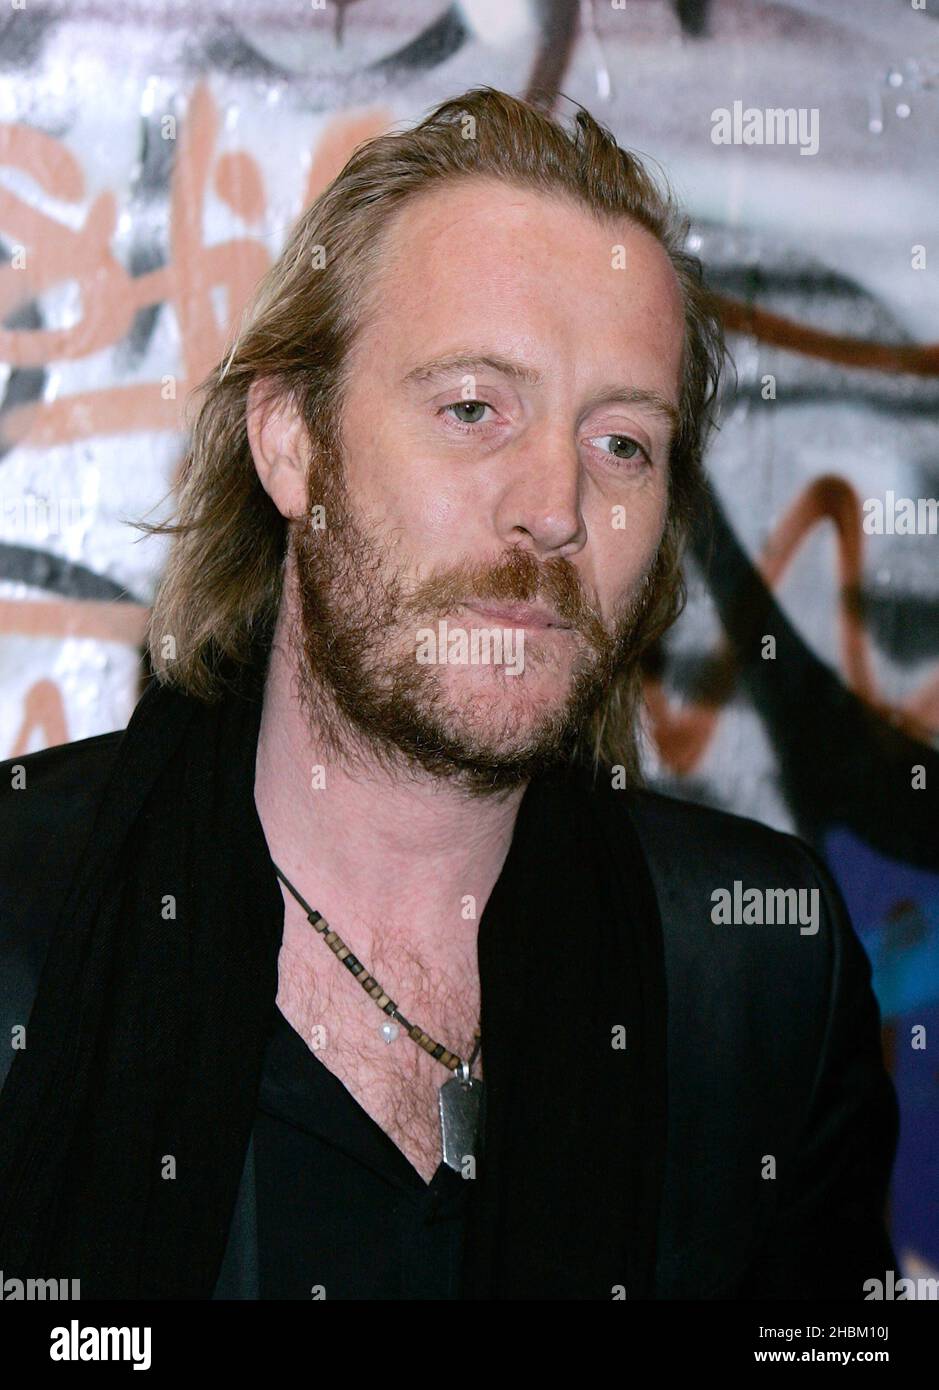 Rhys Ifans arriving for the UK Film Premiere of 'Banksy: Exit Through The Gift Shop', at Leake Street Tunnel in Waterloo, London Stock Photo